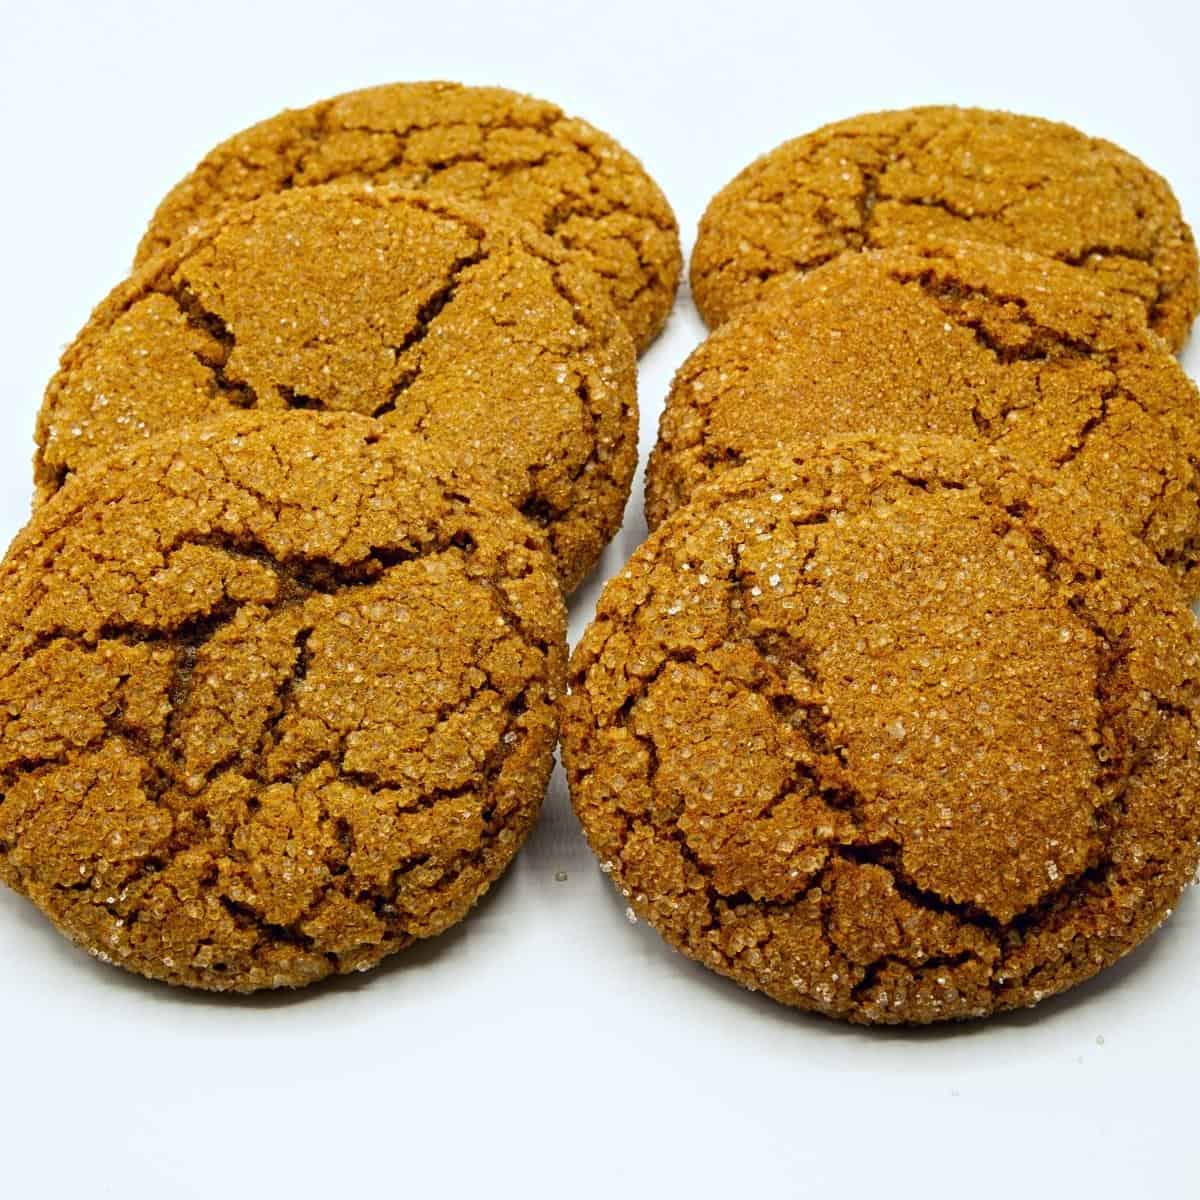 Soft cookies with molasses on the table.